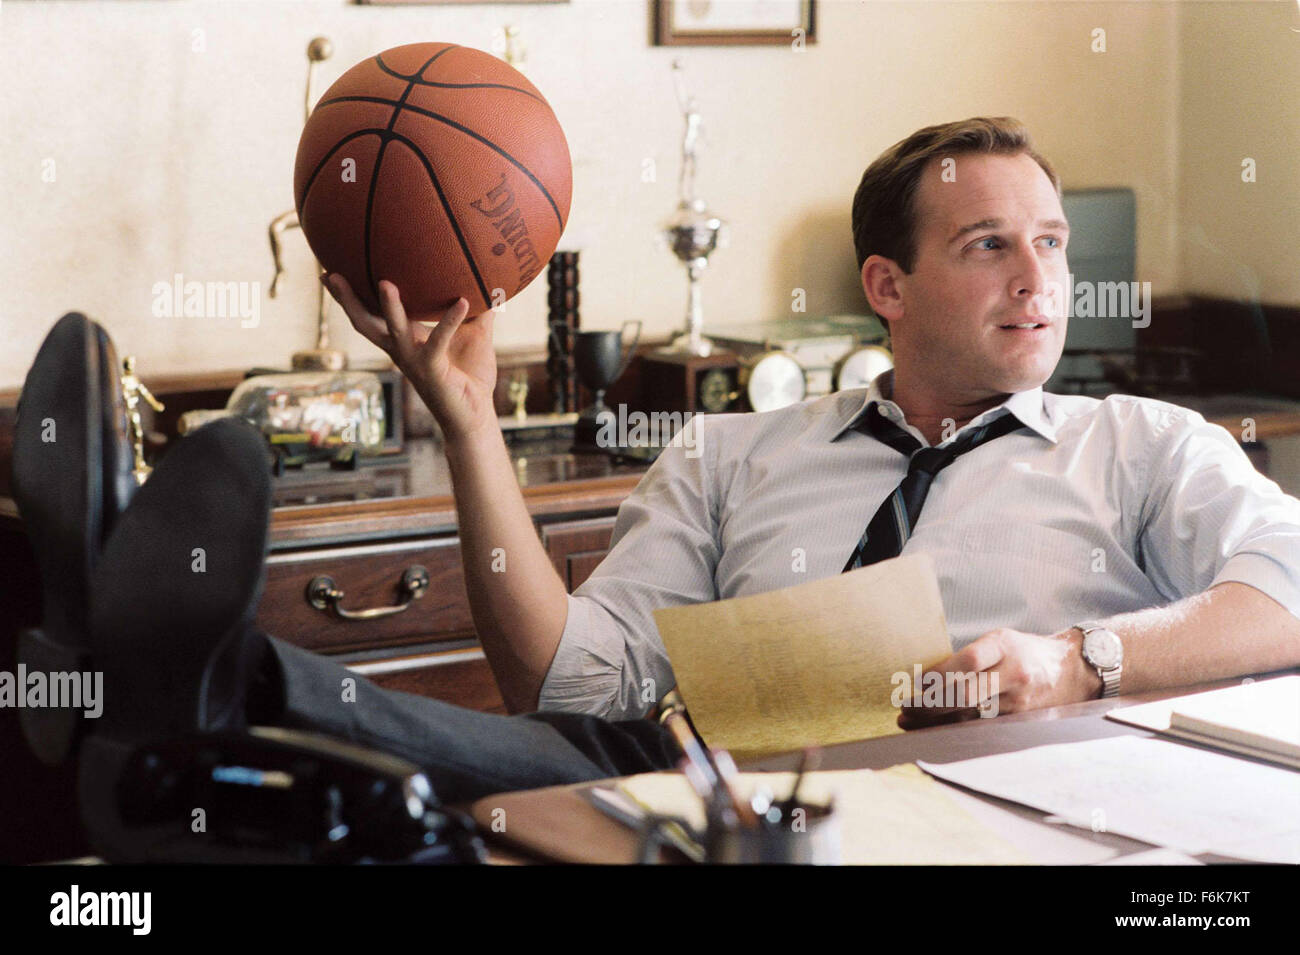 RELEASE DATE: Jan 11, 2006;STUDIO: Walt Disney Pictures. PLOT: In 1966, Texas Western coach Don Haskins led the first all-black starting line-up for a college basketball team to the NCAA national championship. PICTURED:     JOSH LUCAS  as Coach Don Haskins. Stock Photo